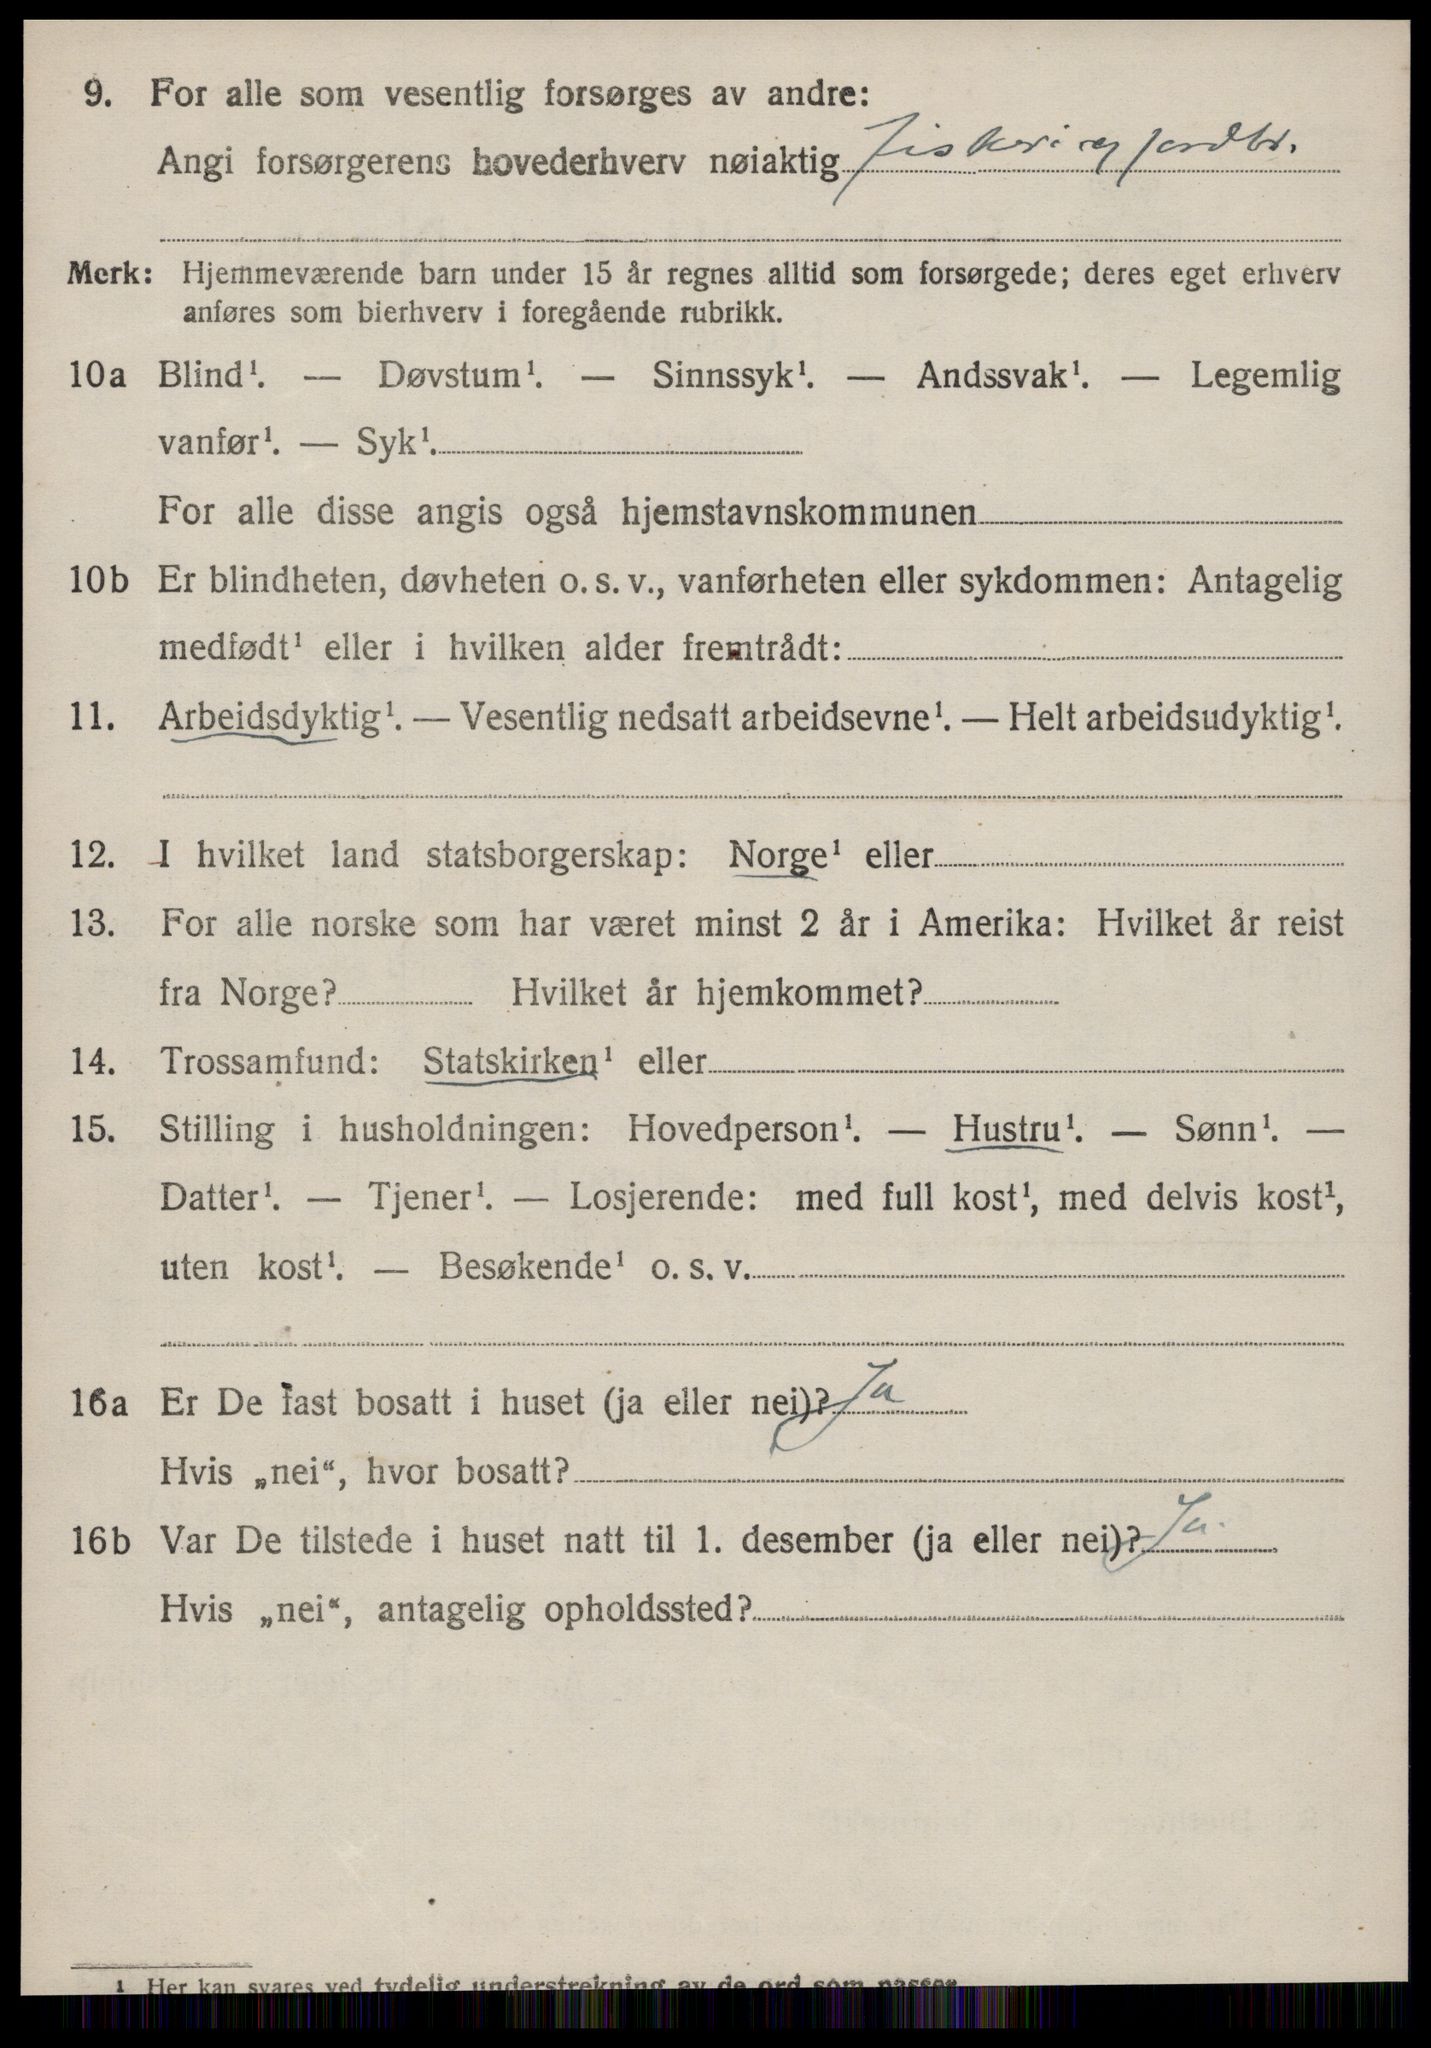 SAT, 1920 census for Bud, 1920, p. 2385